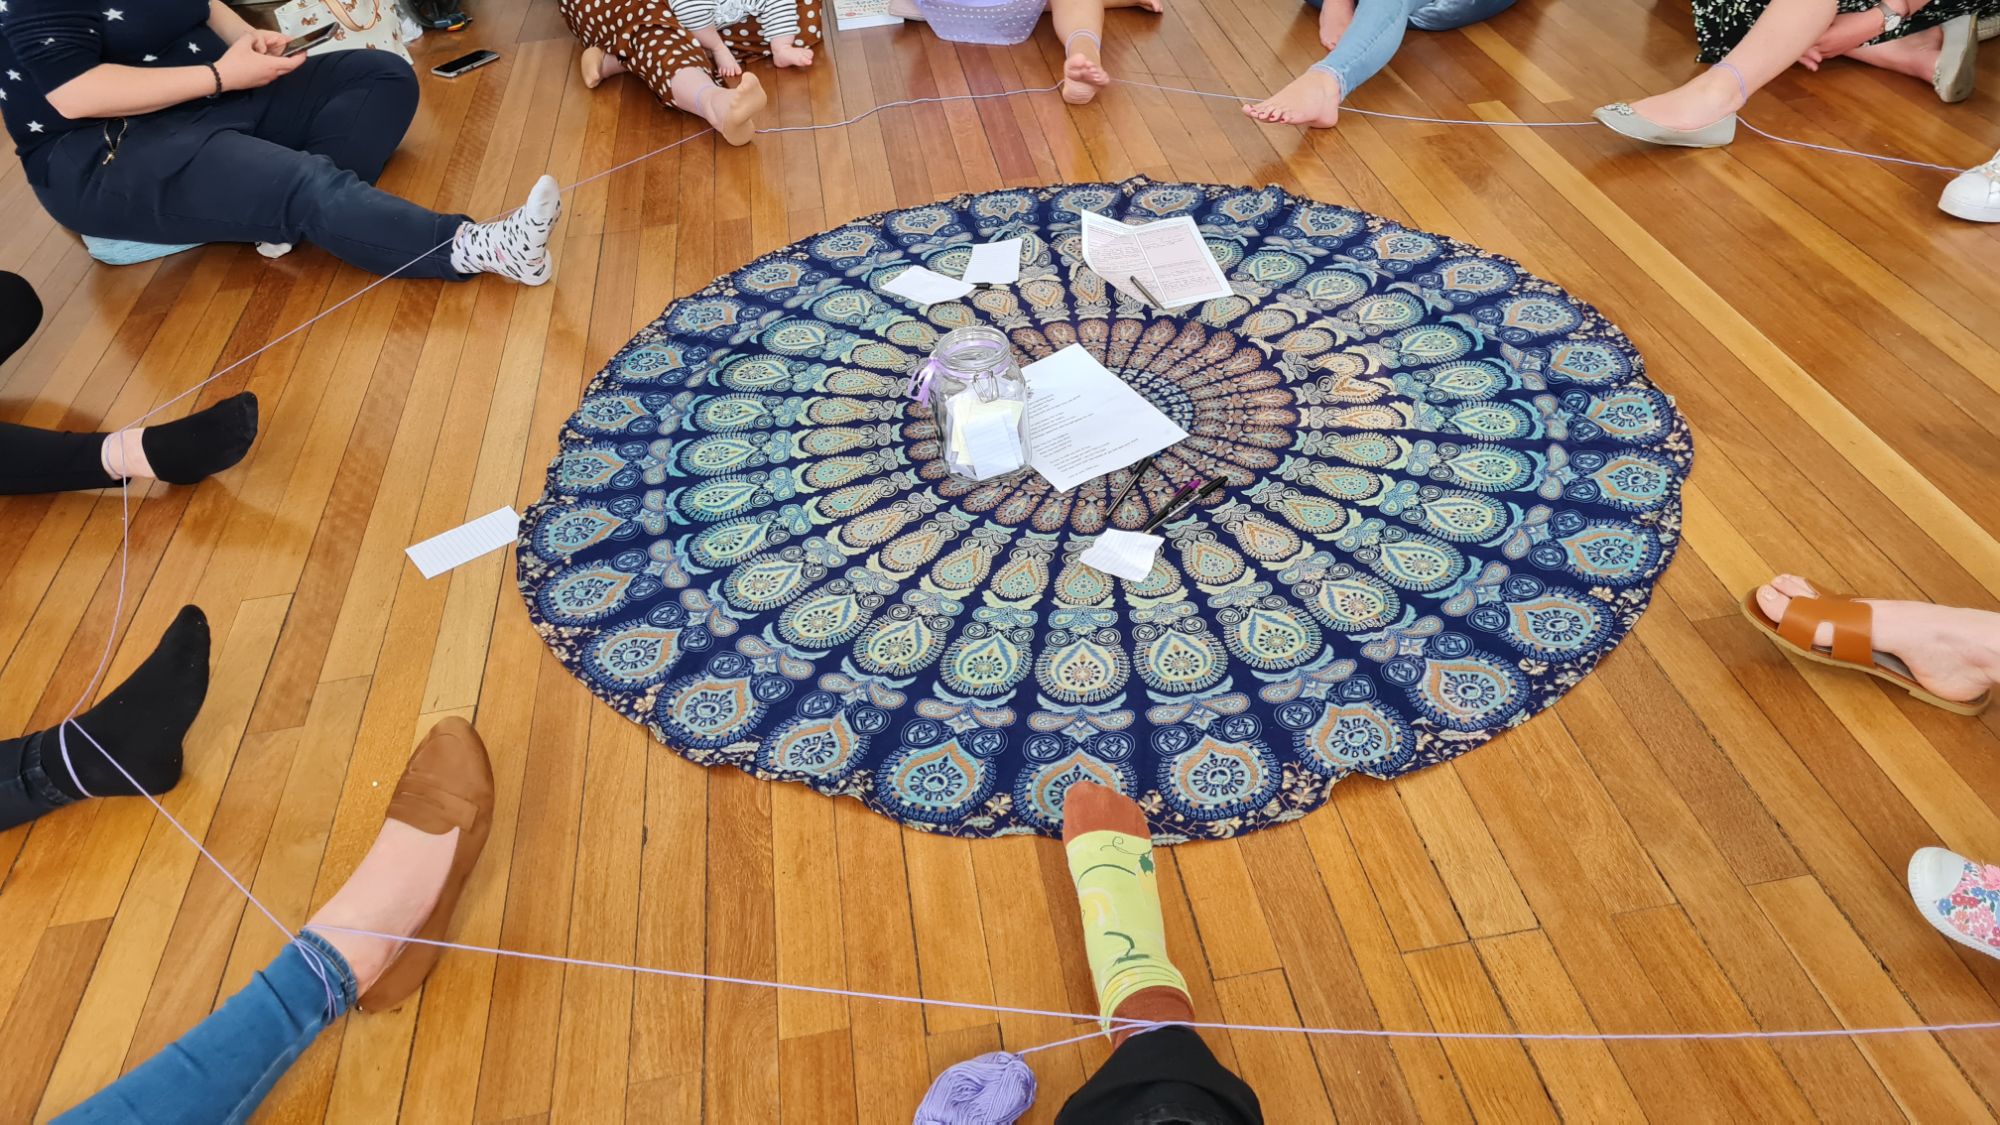 A circular blanket is in the centre of the photo. Around it there are multiple people sat on the floor with one leg extended into the centre. Their ankles are loosely tied together with yarn.